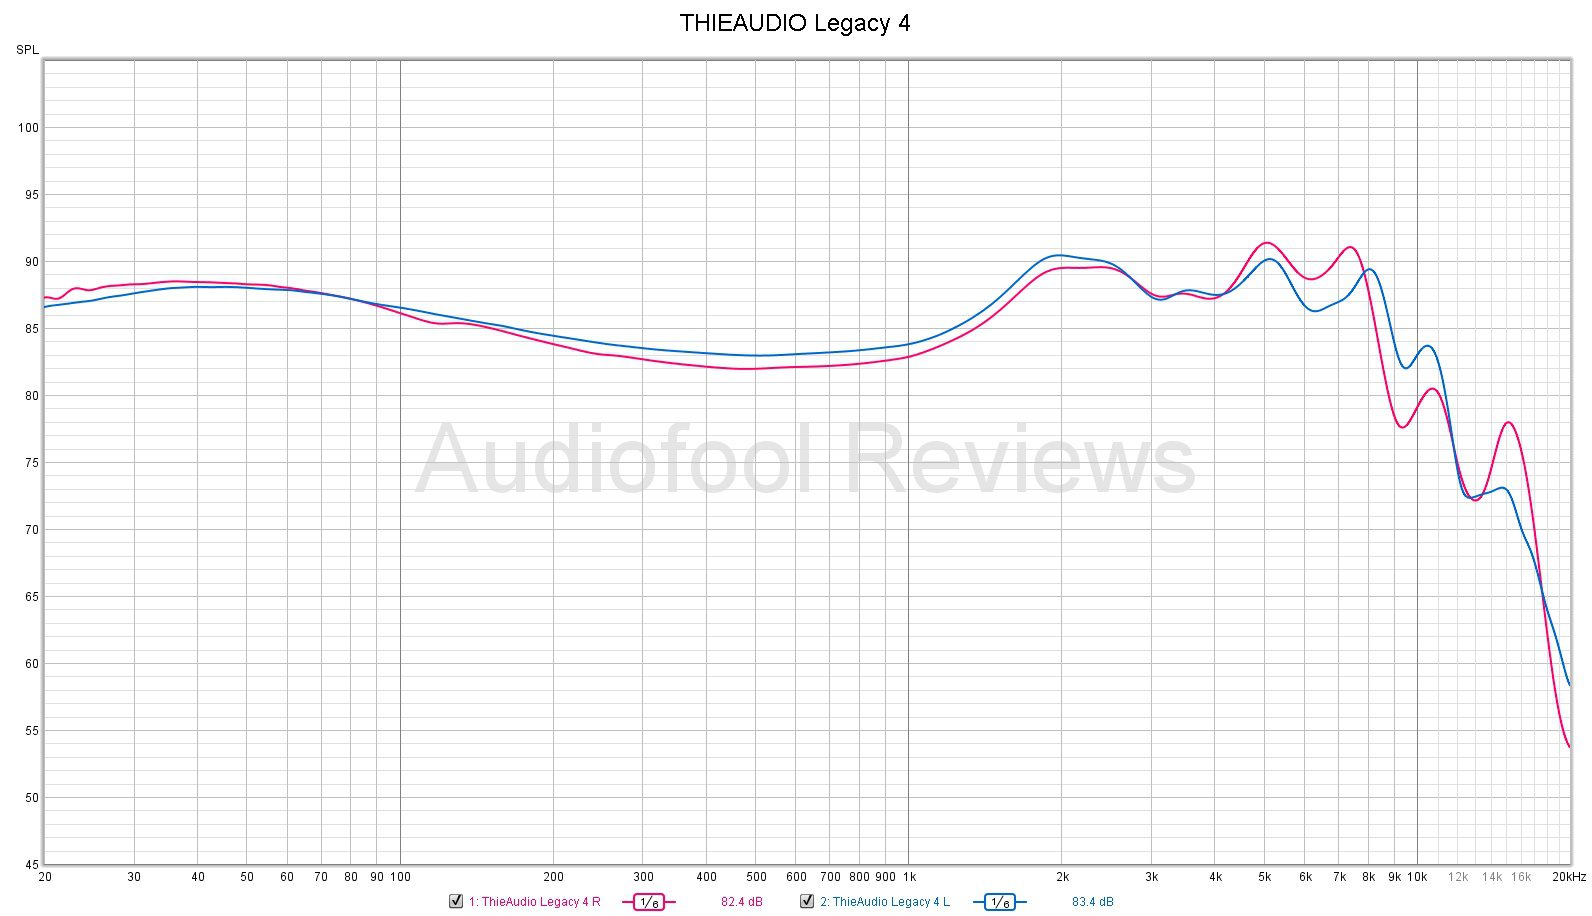 Thieaudio Legacy 4 | Audiofool Reviews